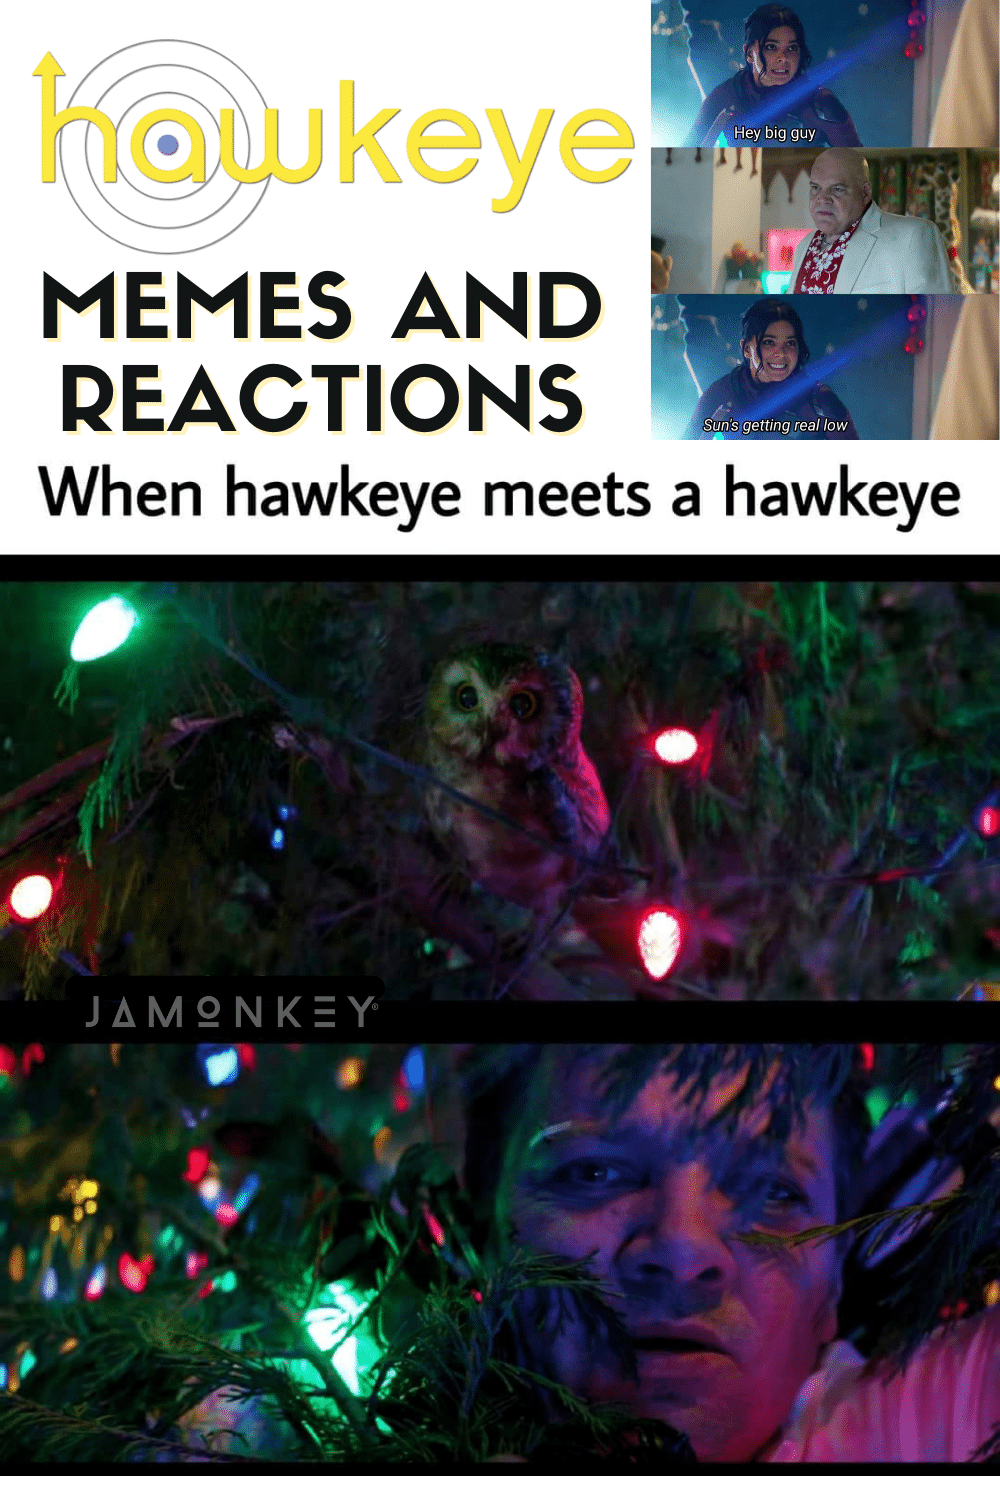 Hawkeye Memes and Reactions